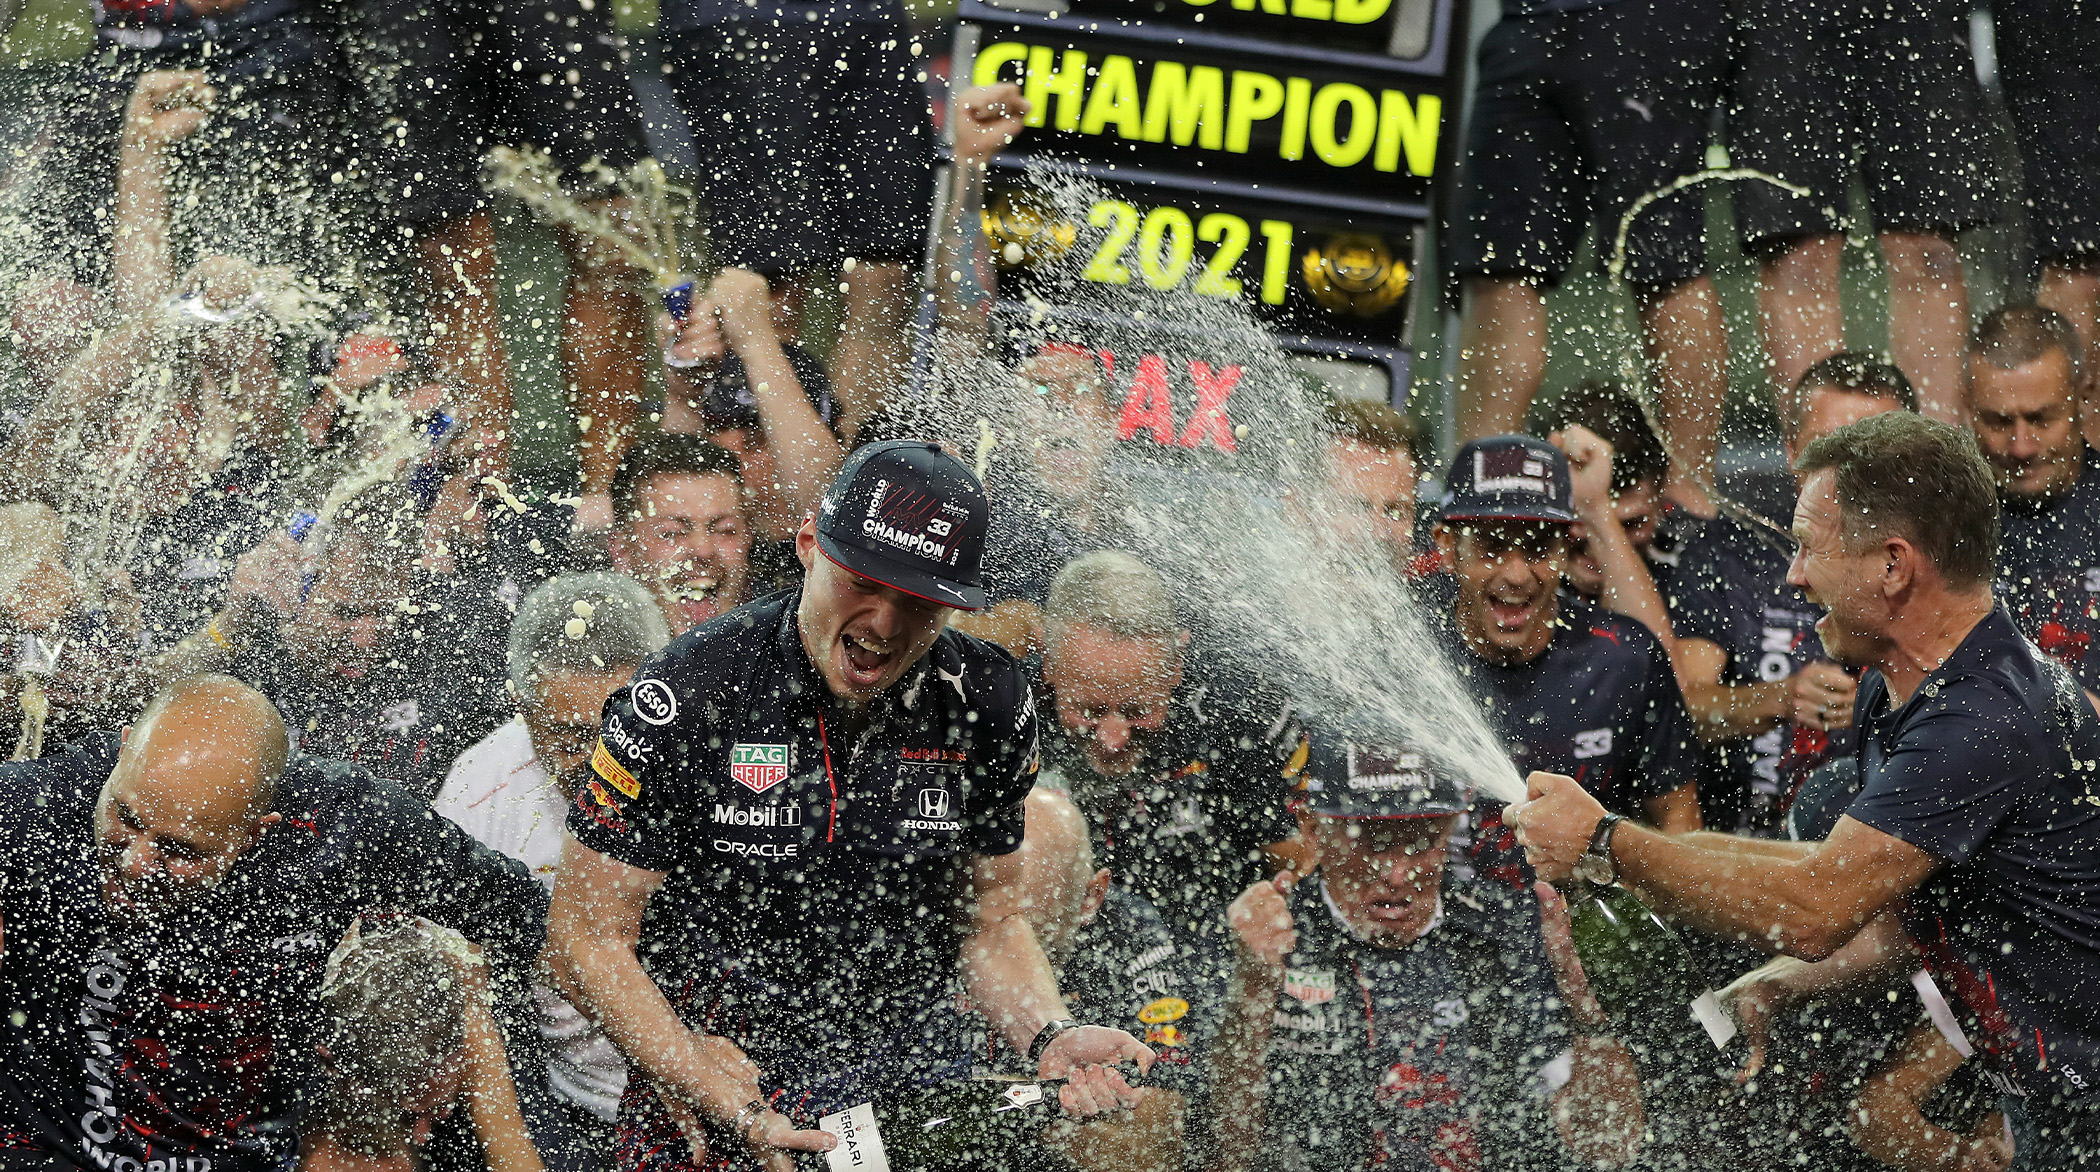 Built For Athletes™ Joins Oracle Red Bull Racing